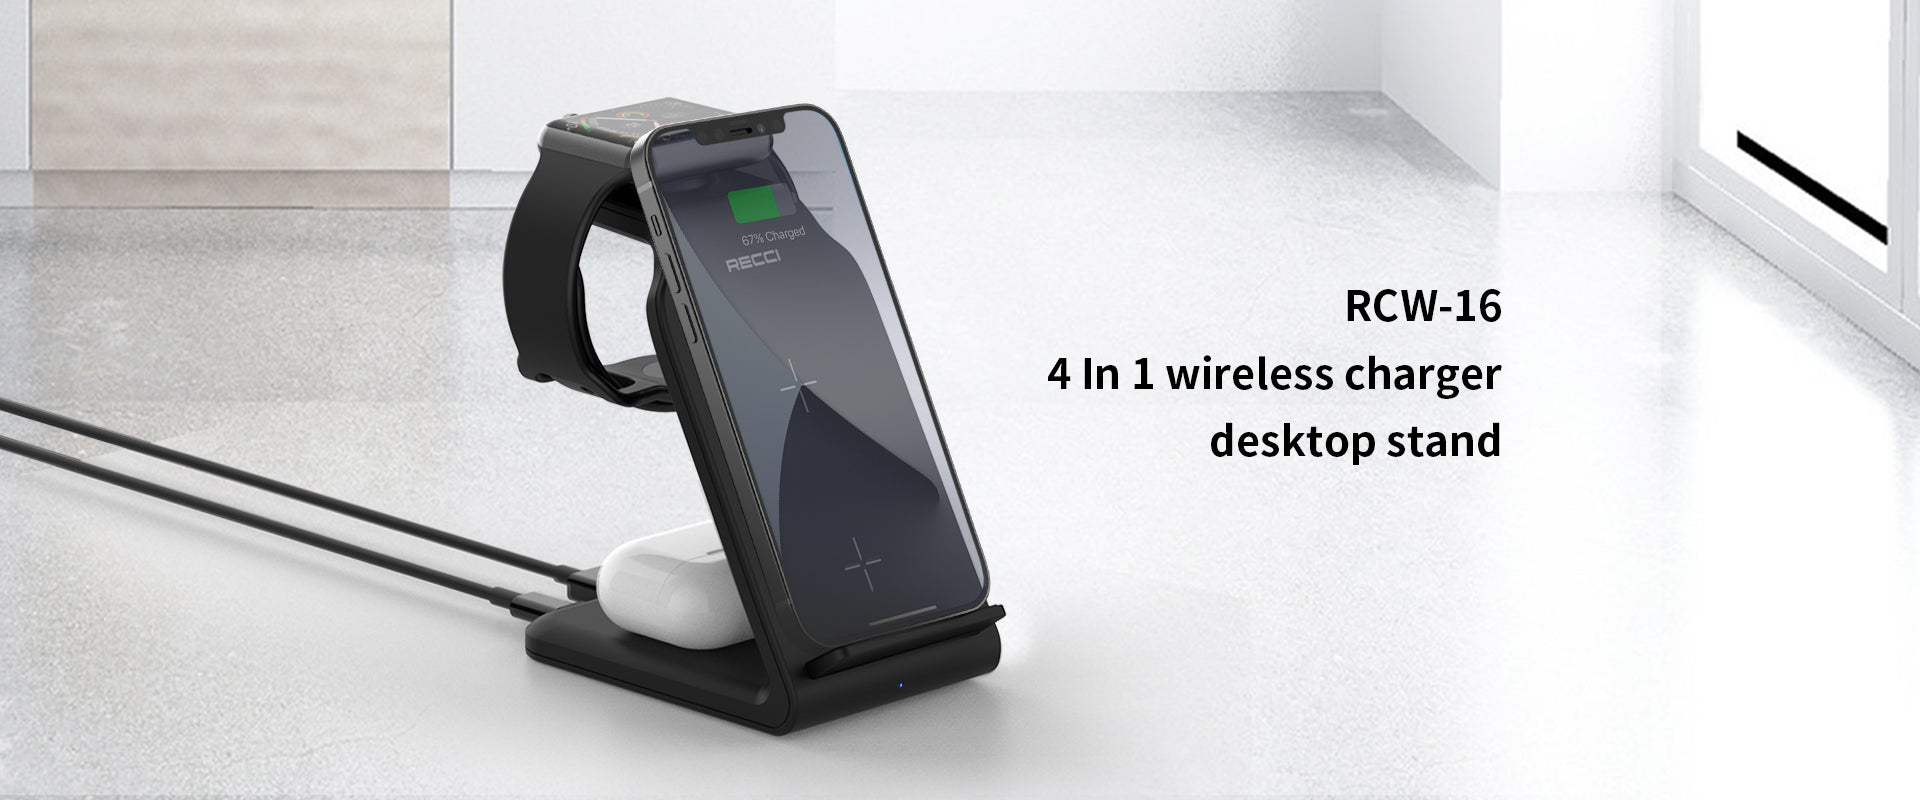 RCW-16 4 IN 1 Wireless Charger Desktop Stand